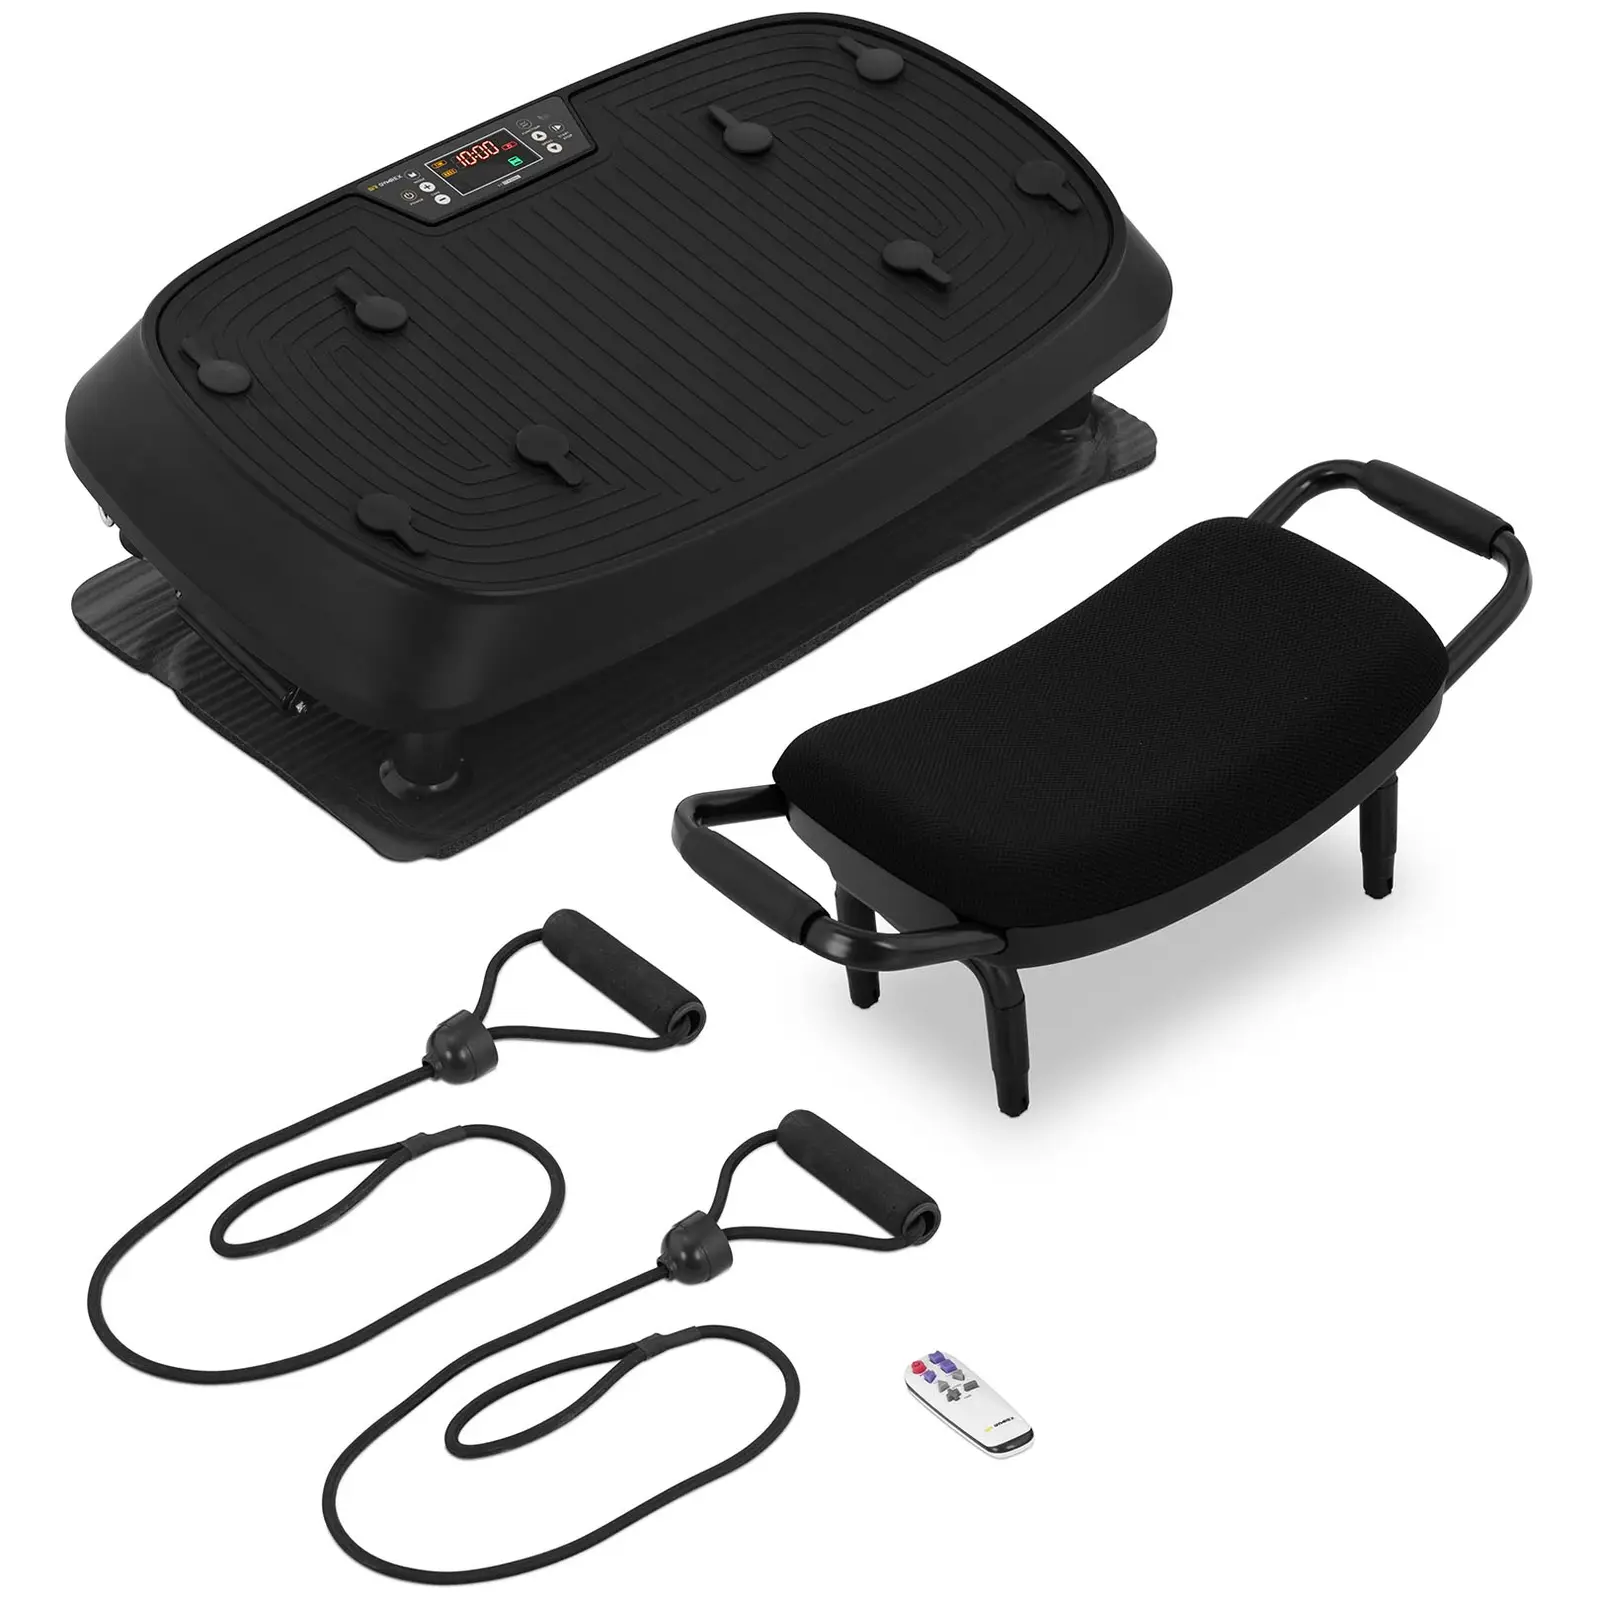 Vibration Plate - 61 x 35 cm - up to 120 kg - remote control - seat